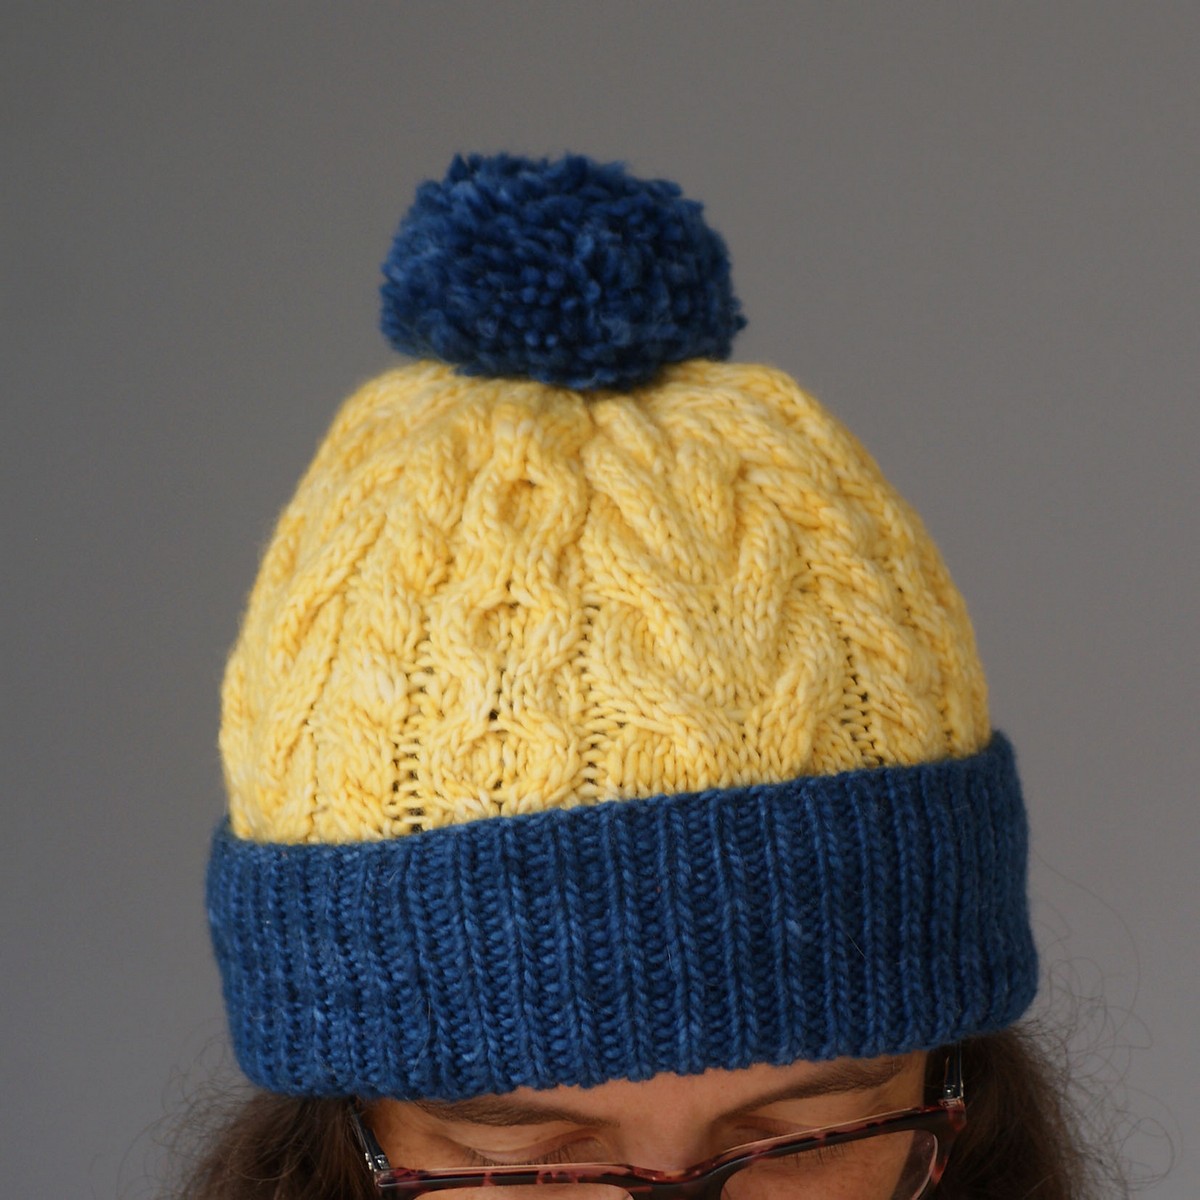 Knit Cabled Hat Patterns